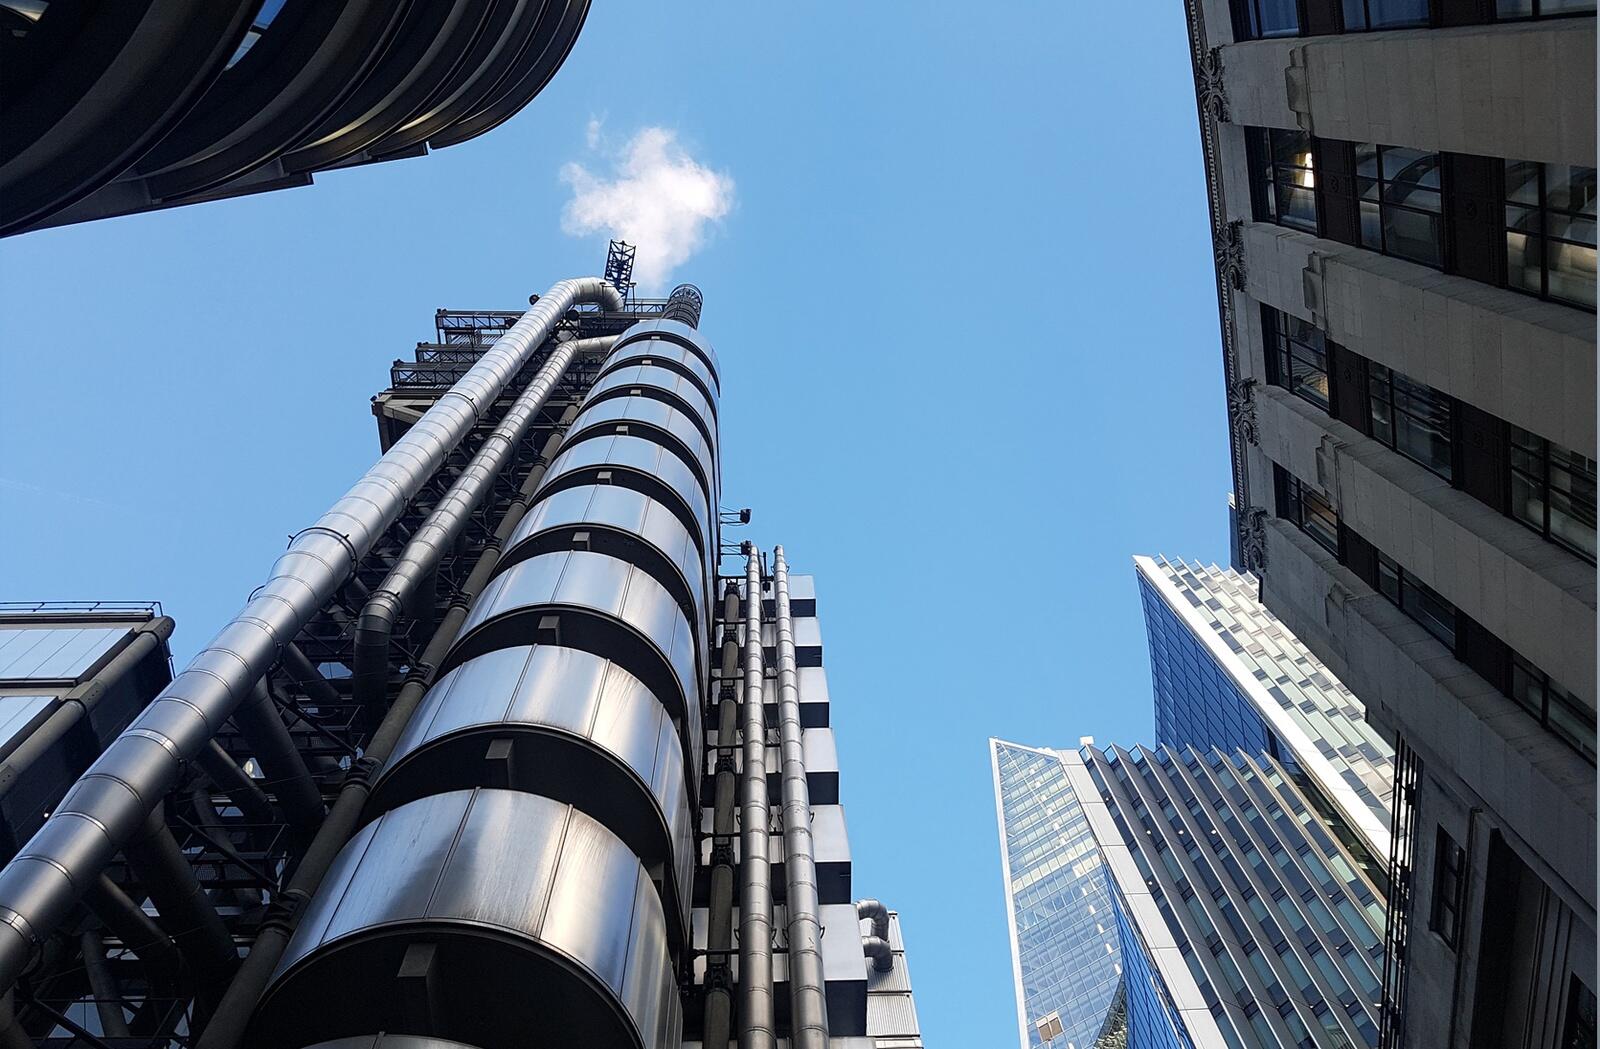 Lloyd's and Willis building